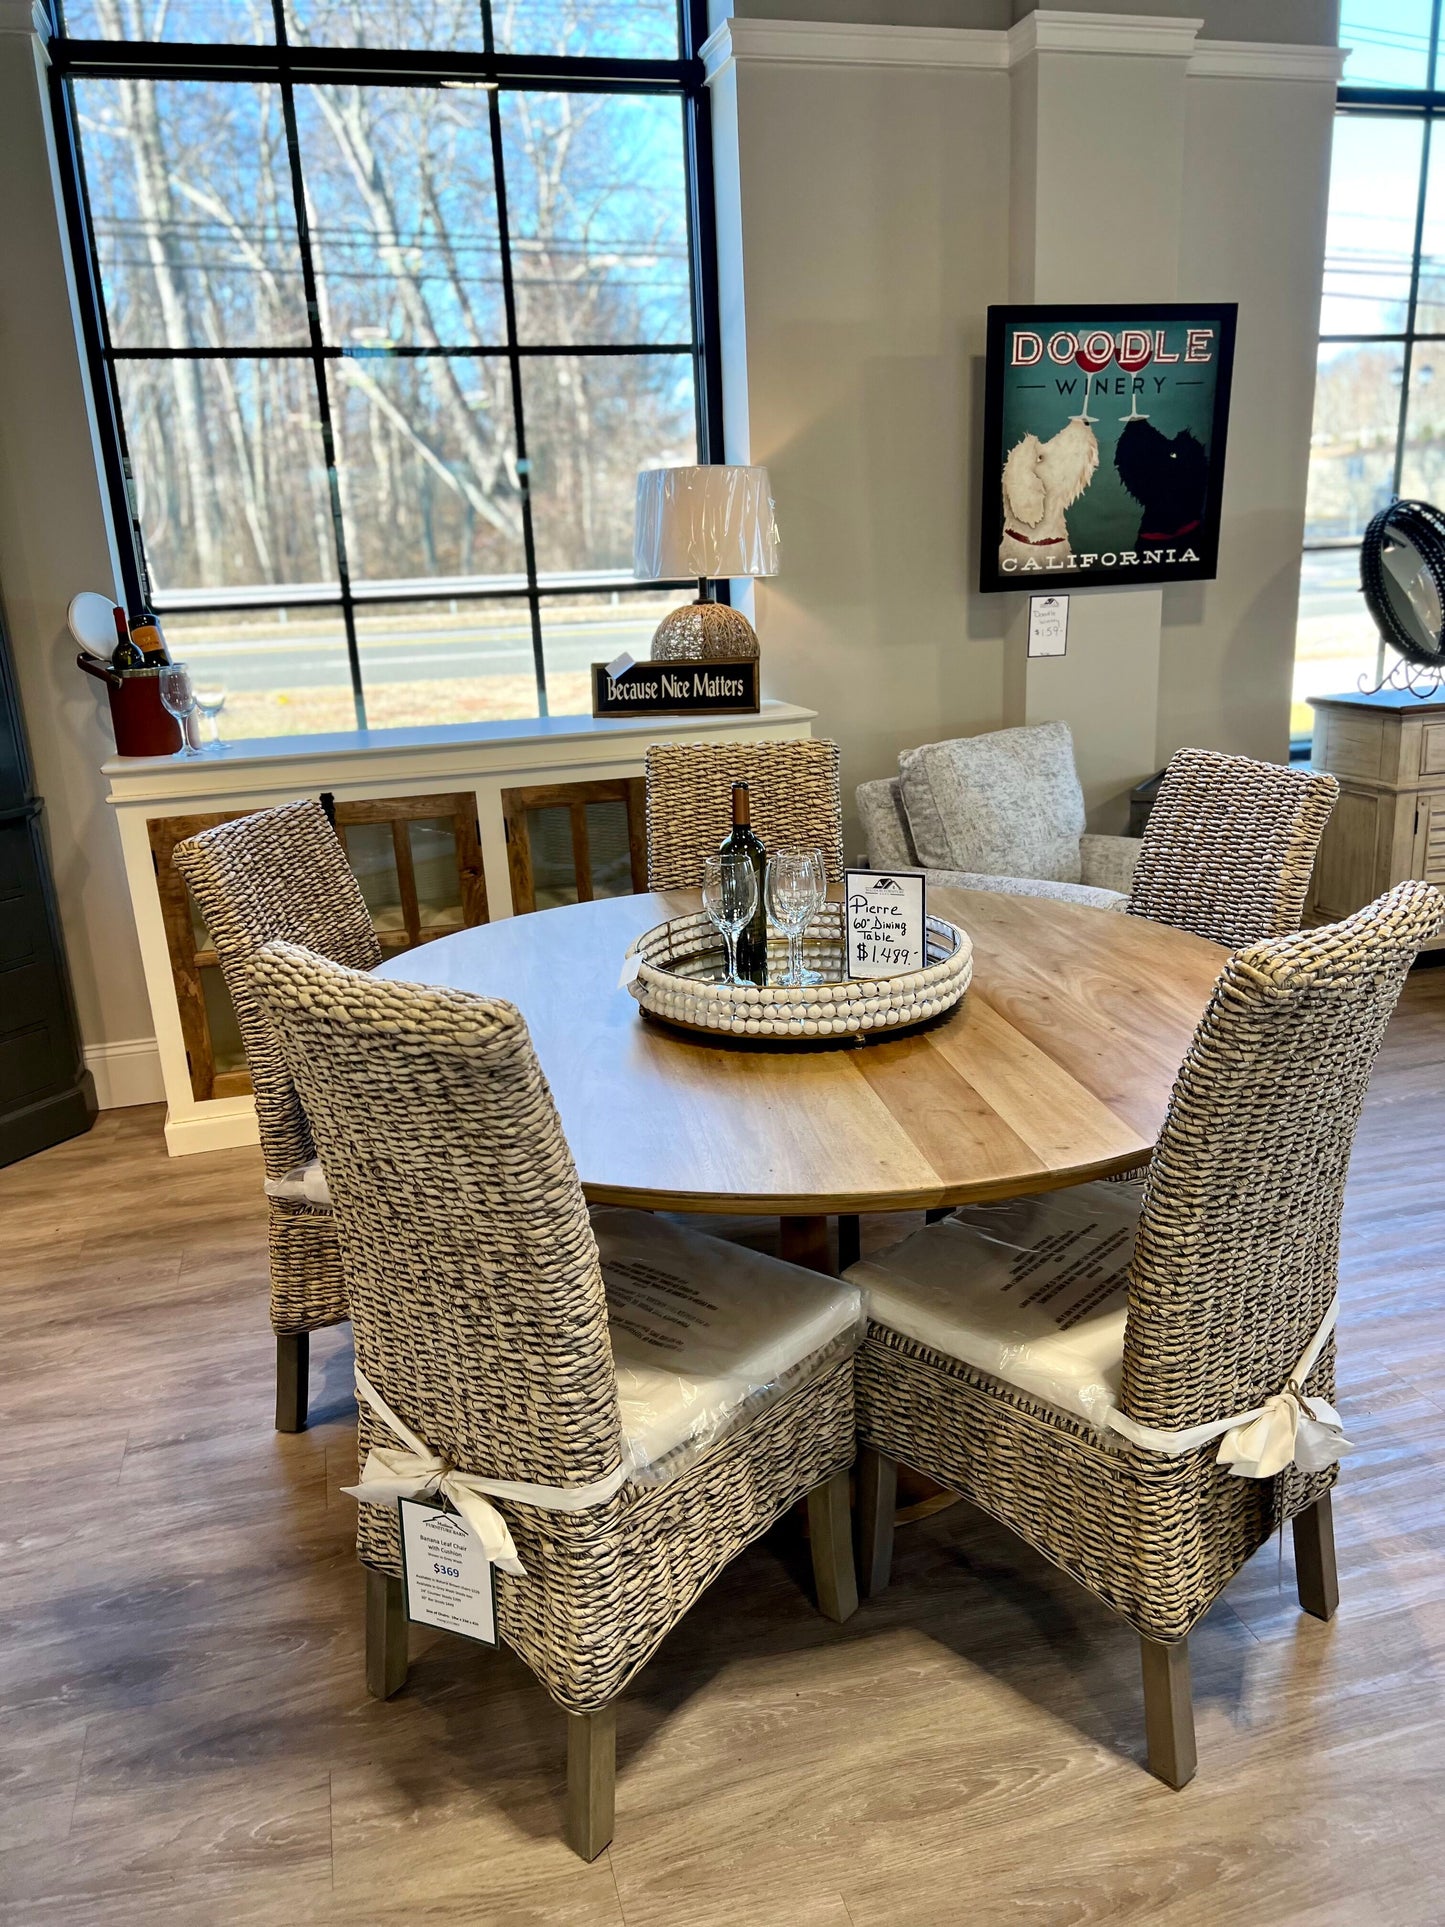 Goucho 60" Round Dining Table